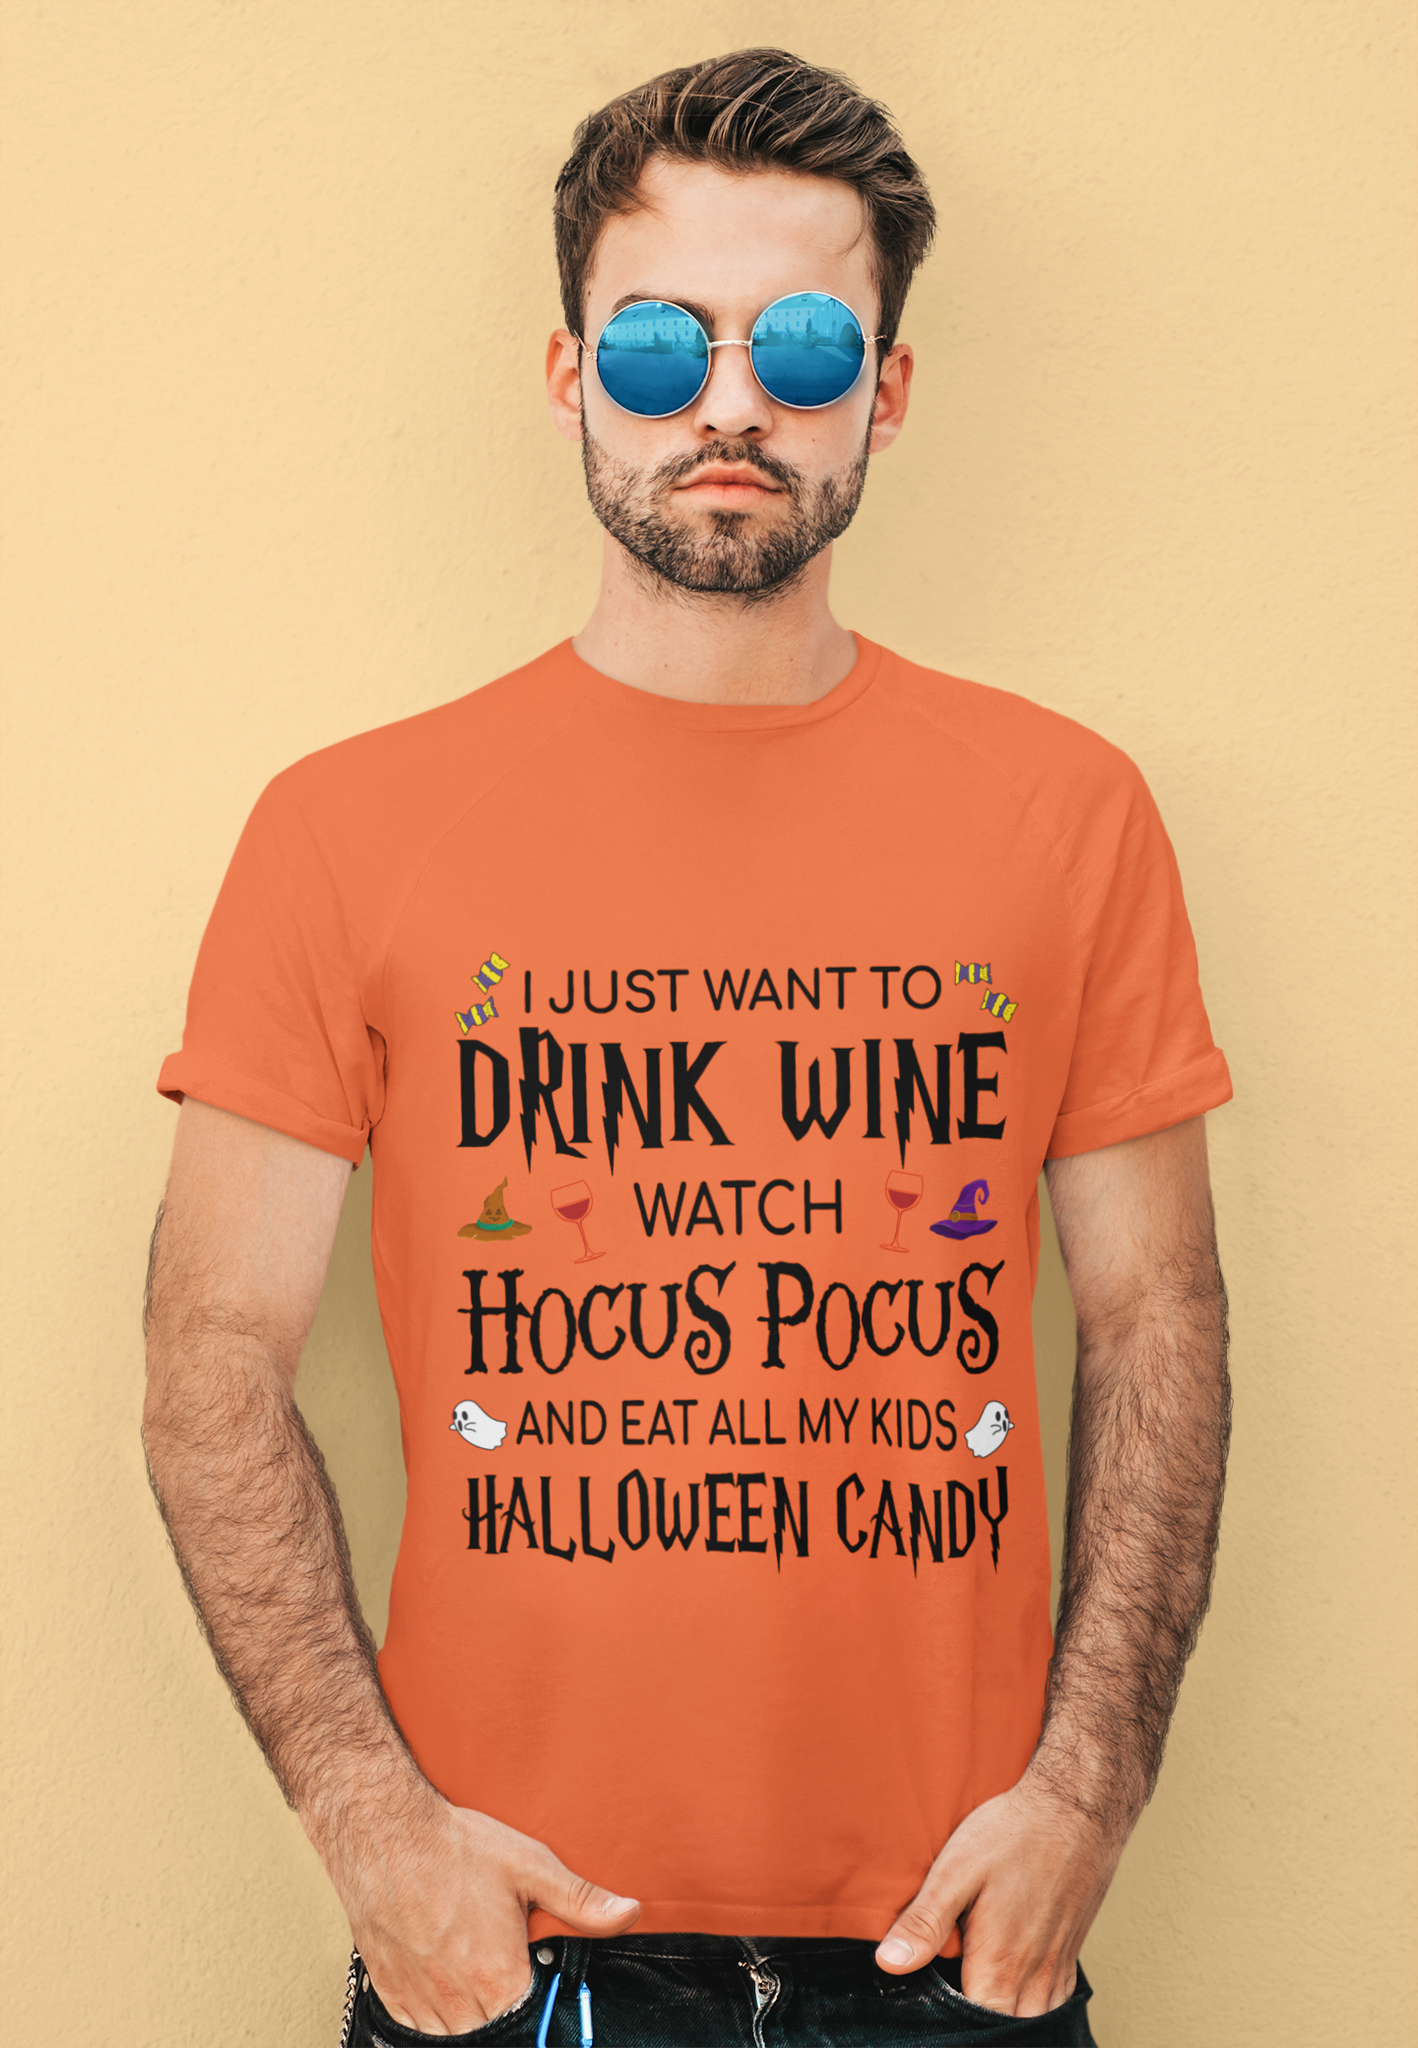 Hocus Pocus T Shirt, I Just Want To Drink Wine Shirt, Watch Hocus Pocus And Eat All My Kids Candy Shirt, Halloween Gifts